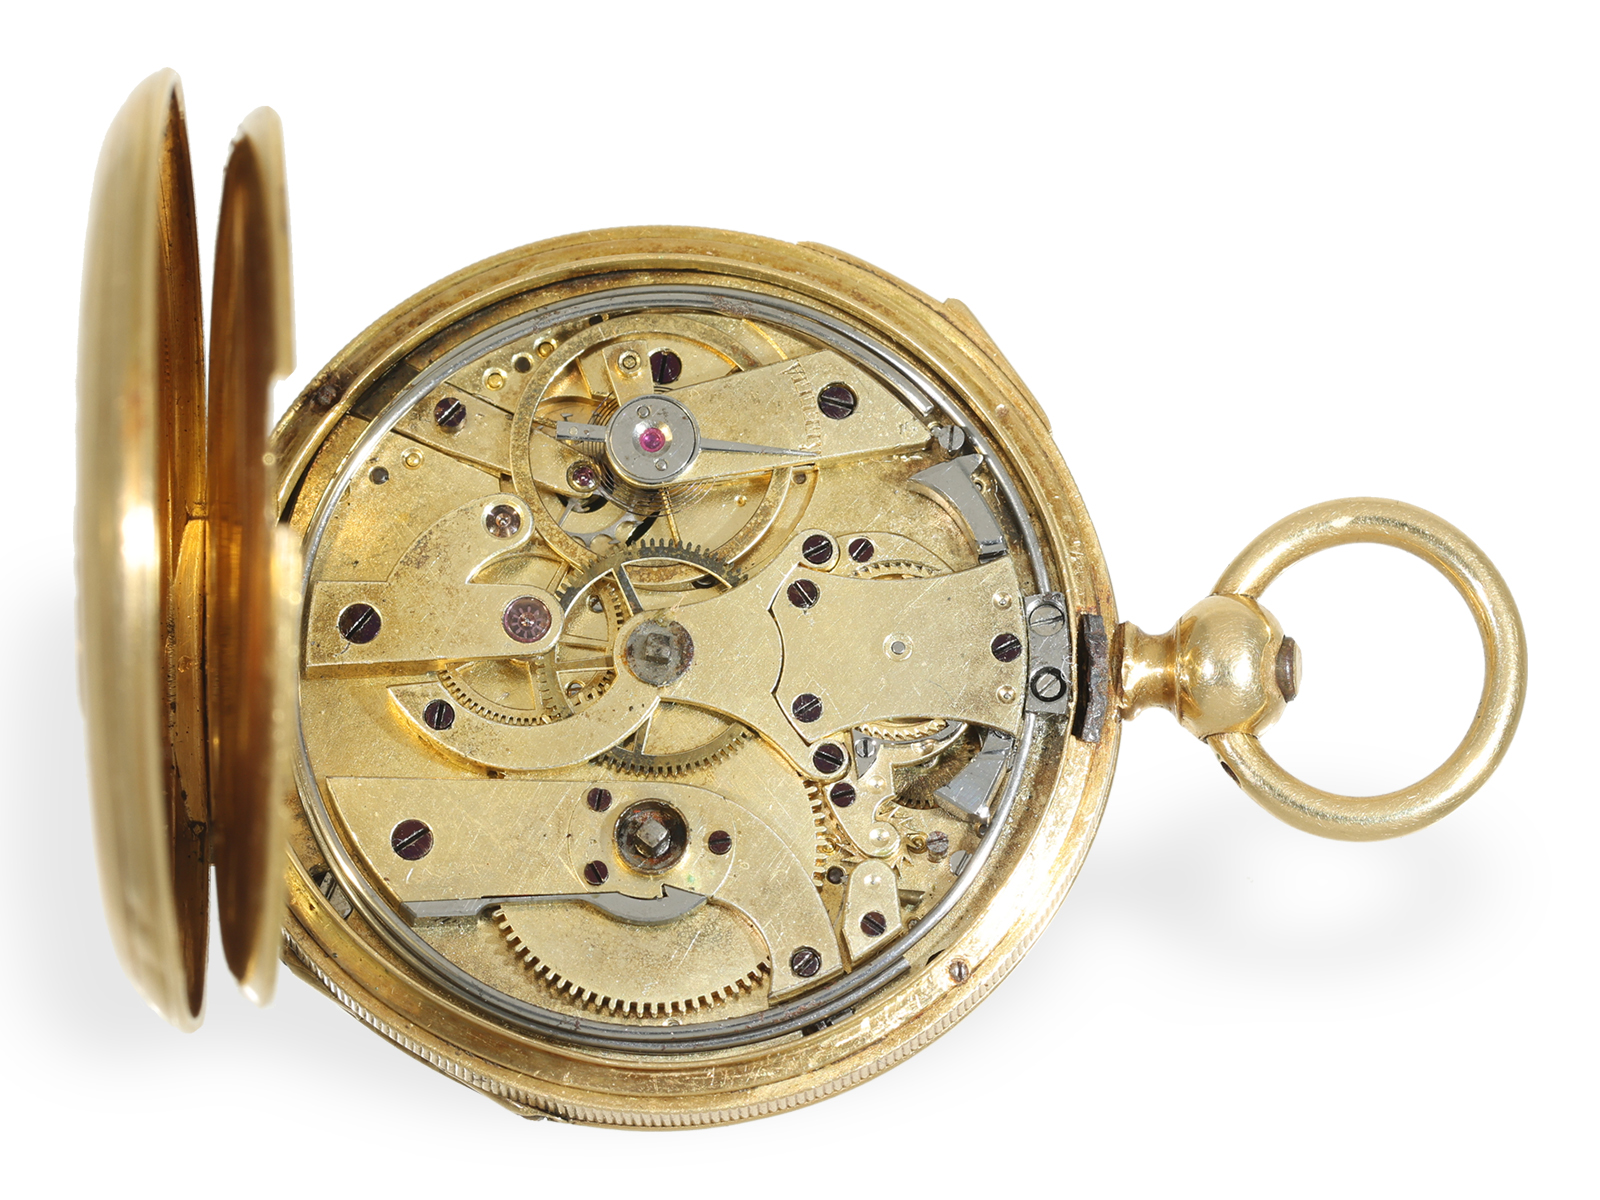 Pocket watch: very rare ladies' pocket watch with repeater, Jeannot Droz a Besancon ca. 1850 - Image 4 of 7